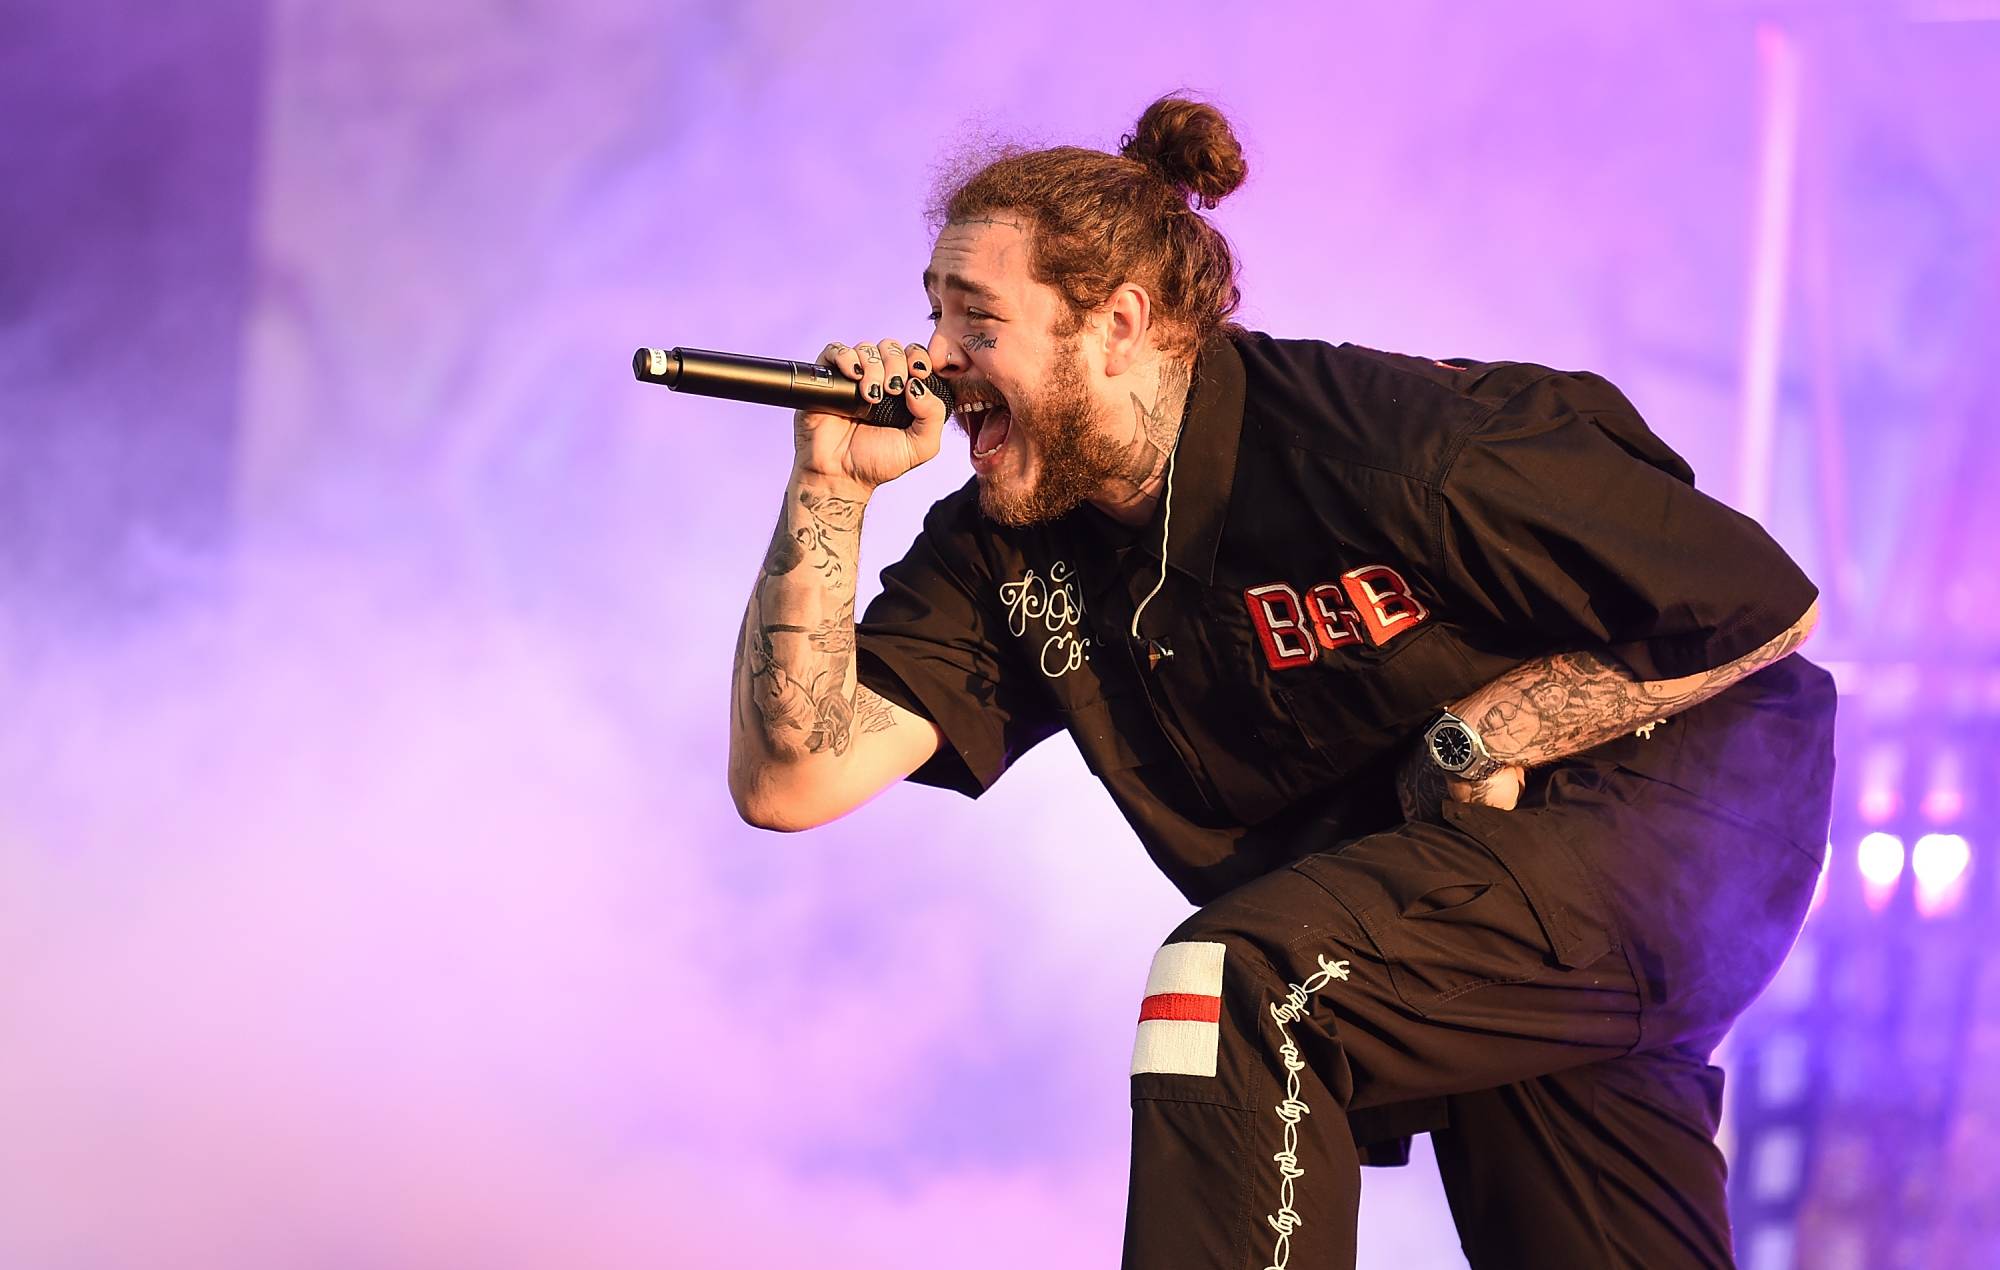 Watch Post Malone perform a Hank Williams cover at surprise Nashville gig